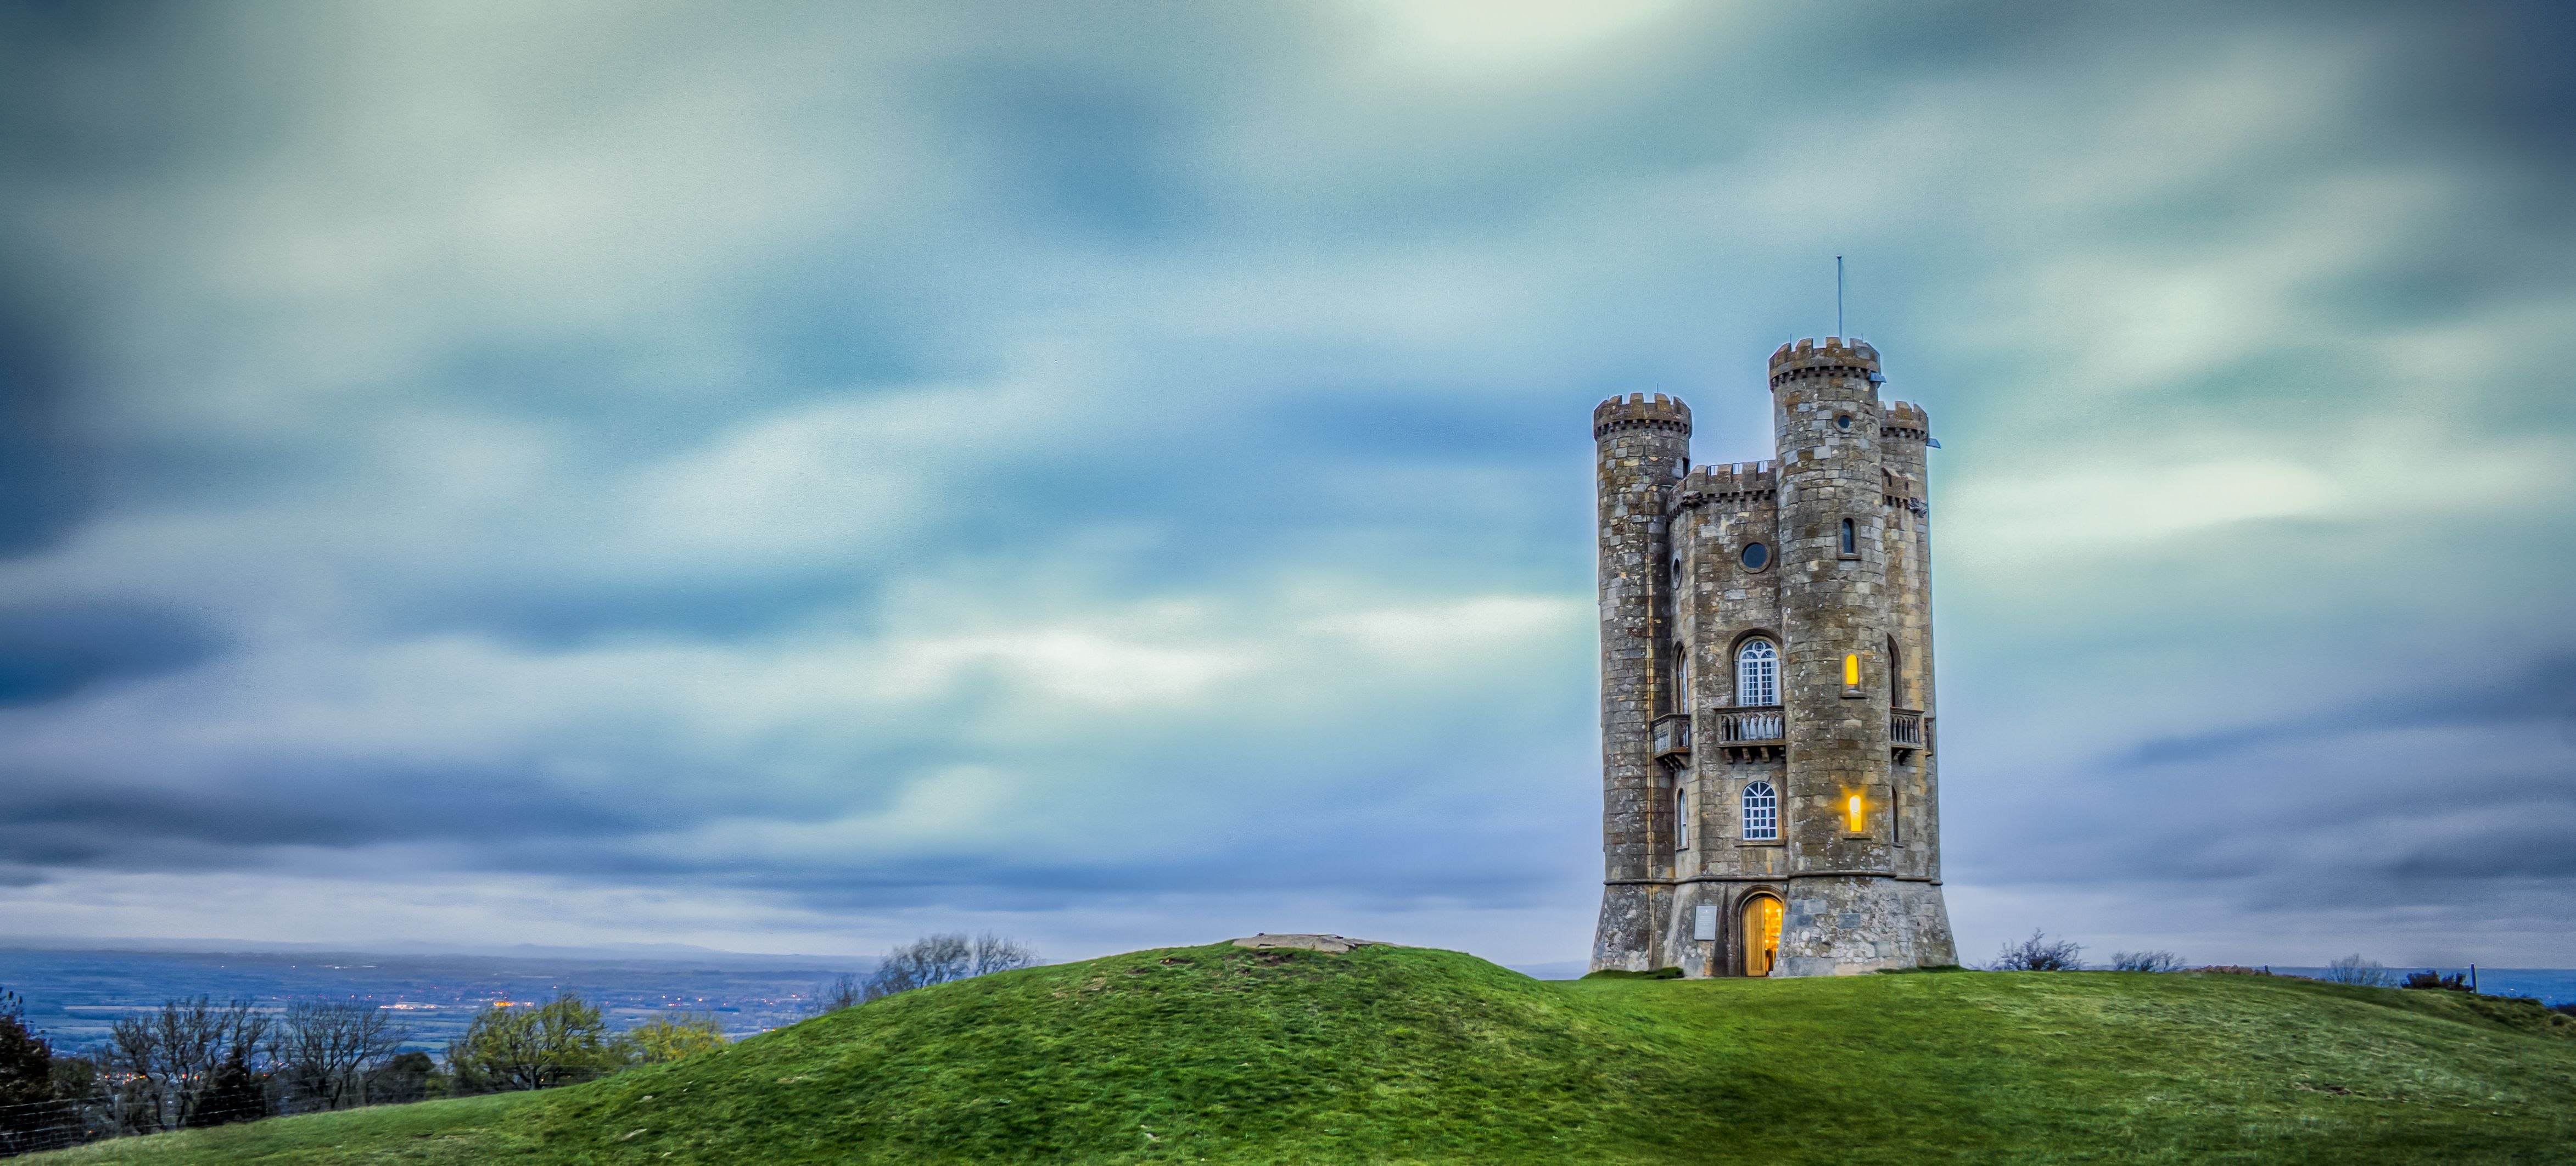 Broadway Tower Worcestershire Background Wallpaper 